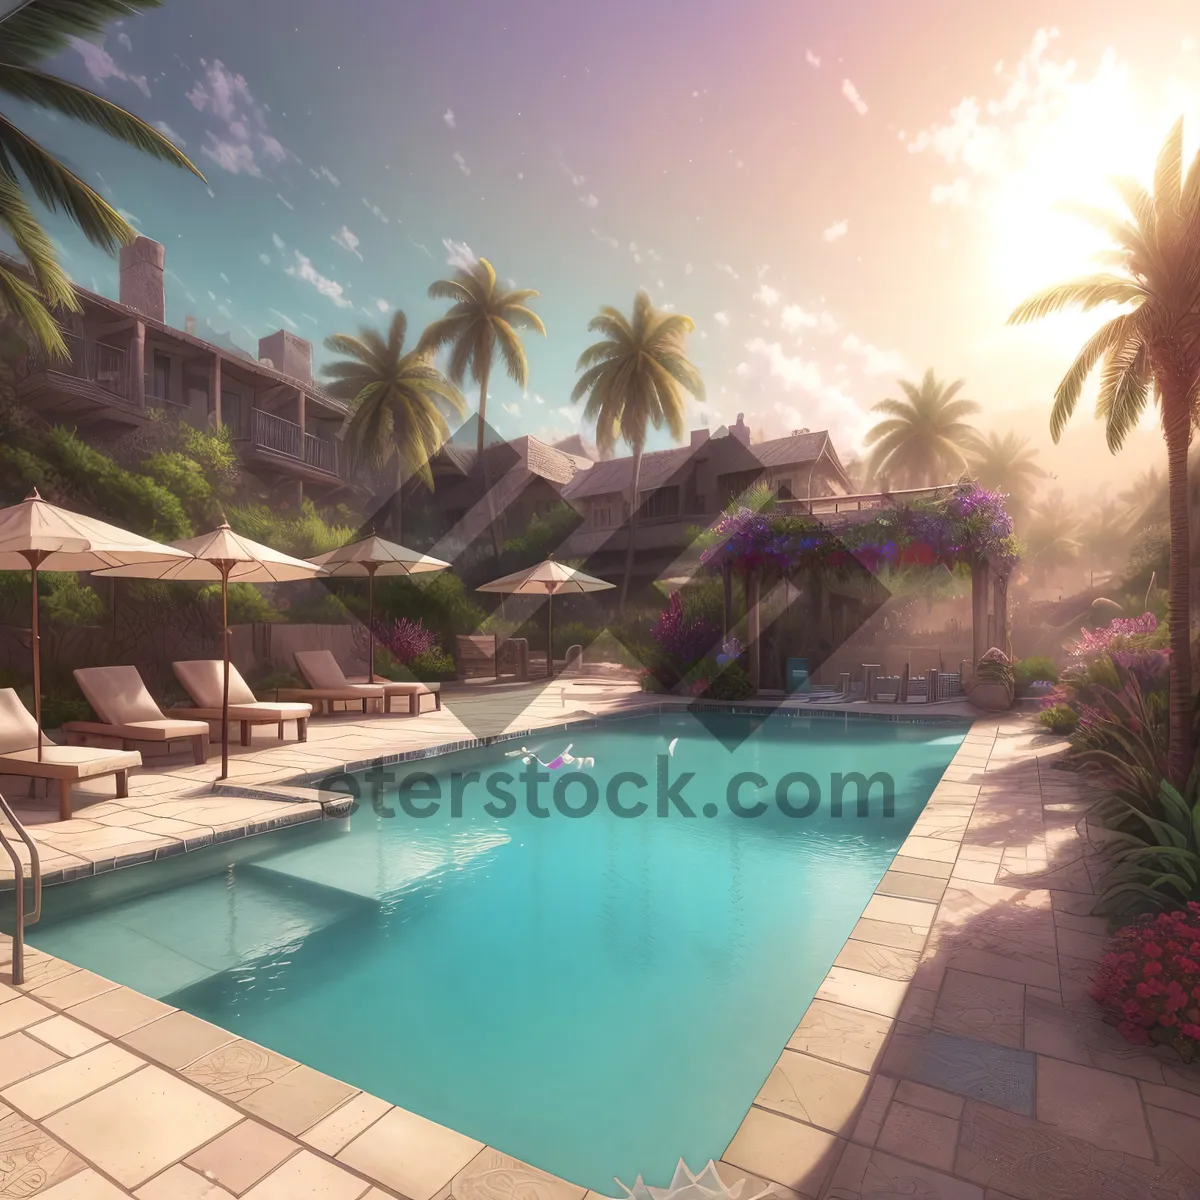 Picture of Exquisite Tropical Resort Pool with Luxurious Holiday Vibes